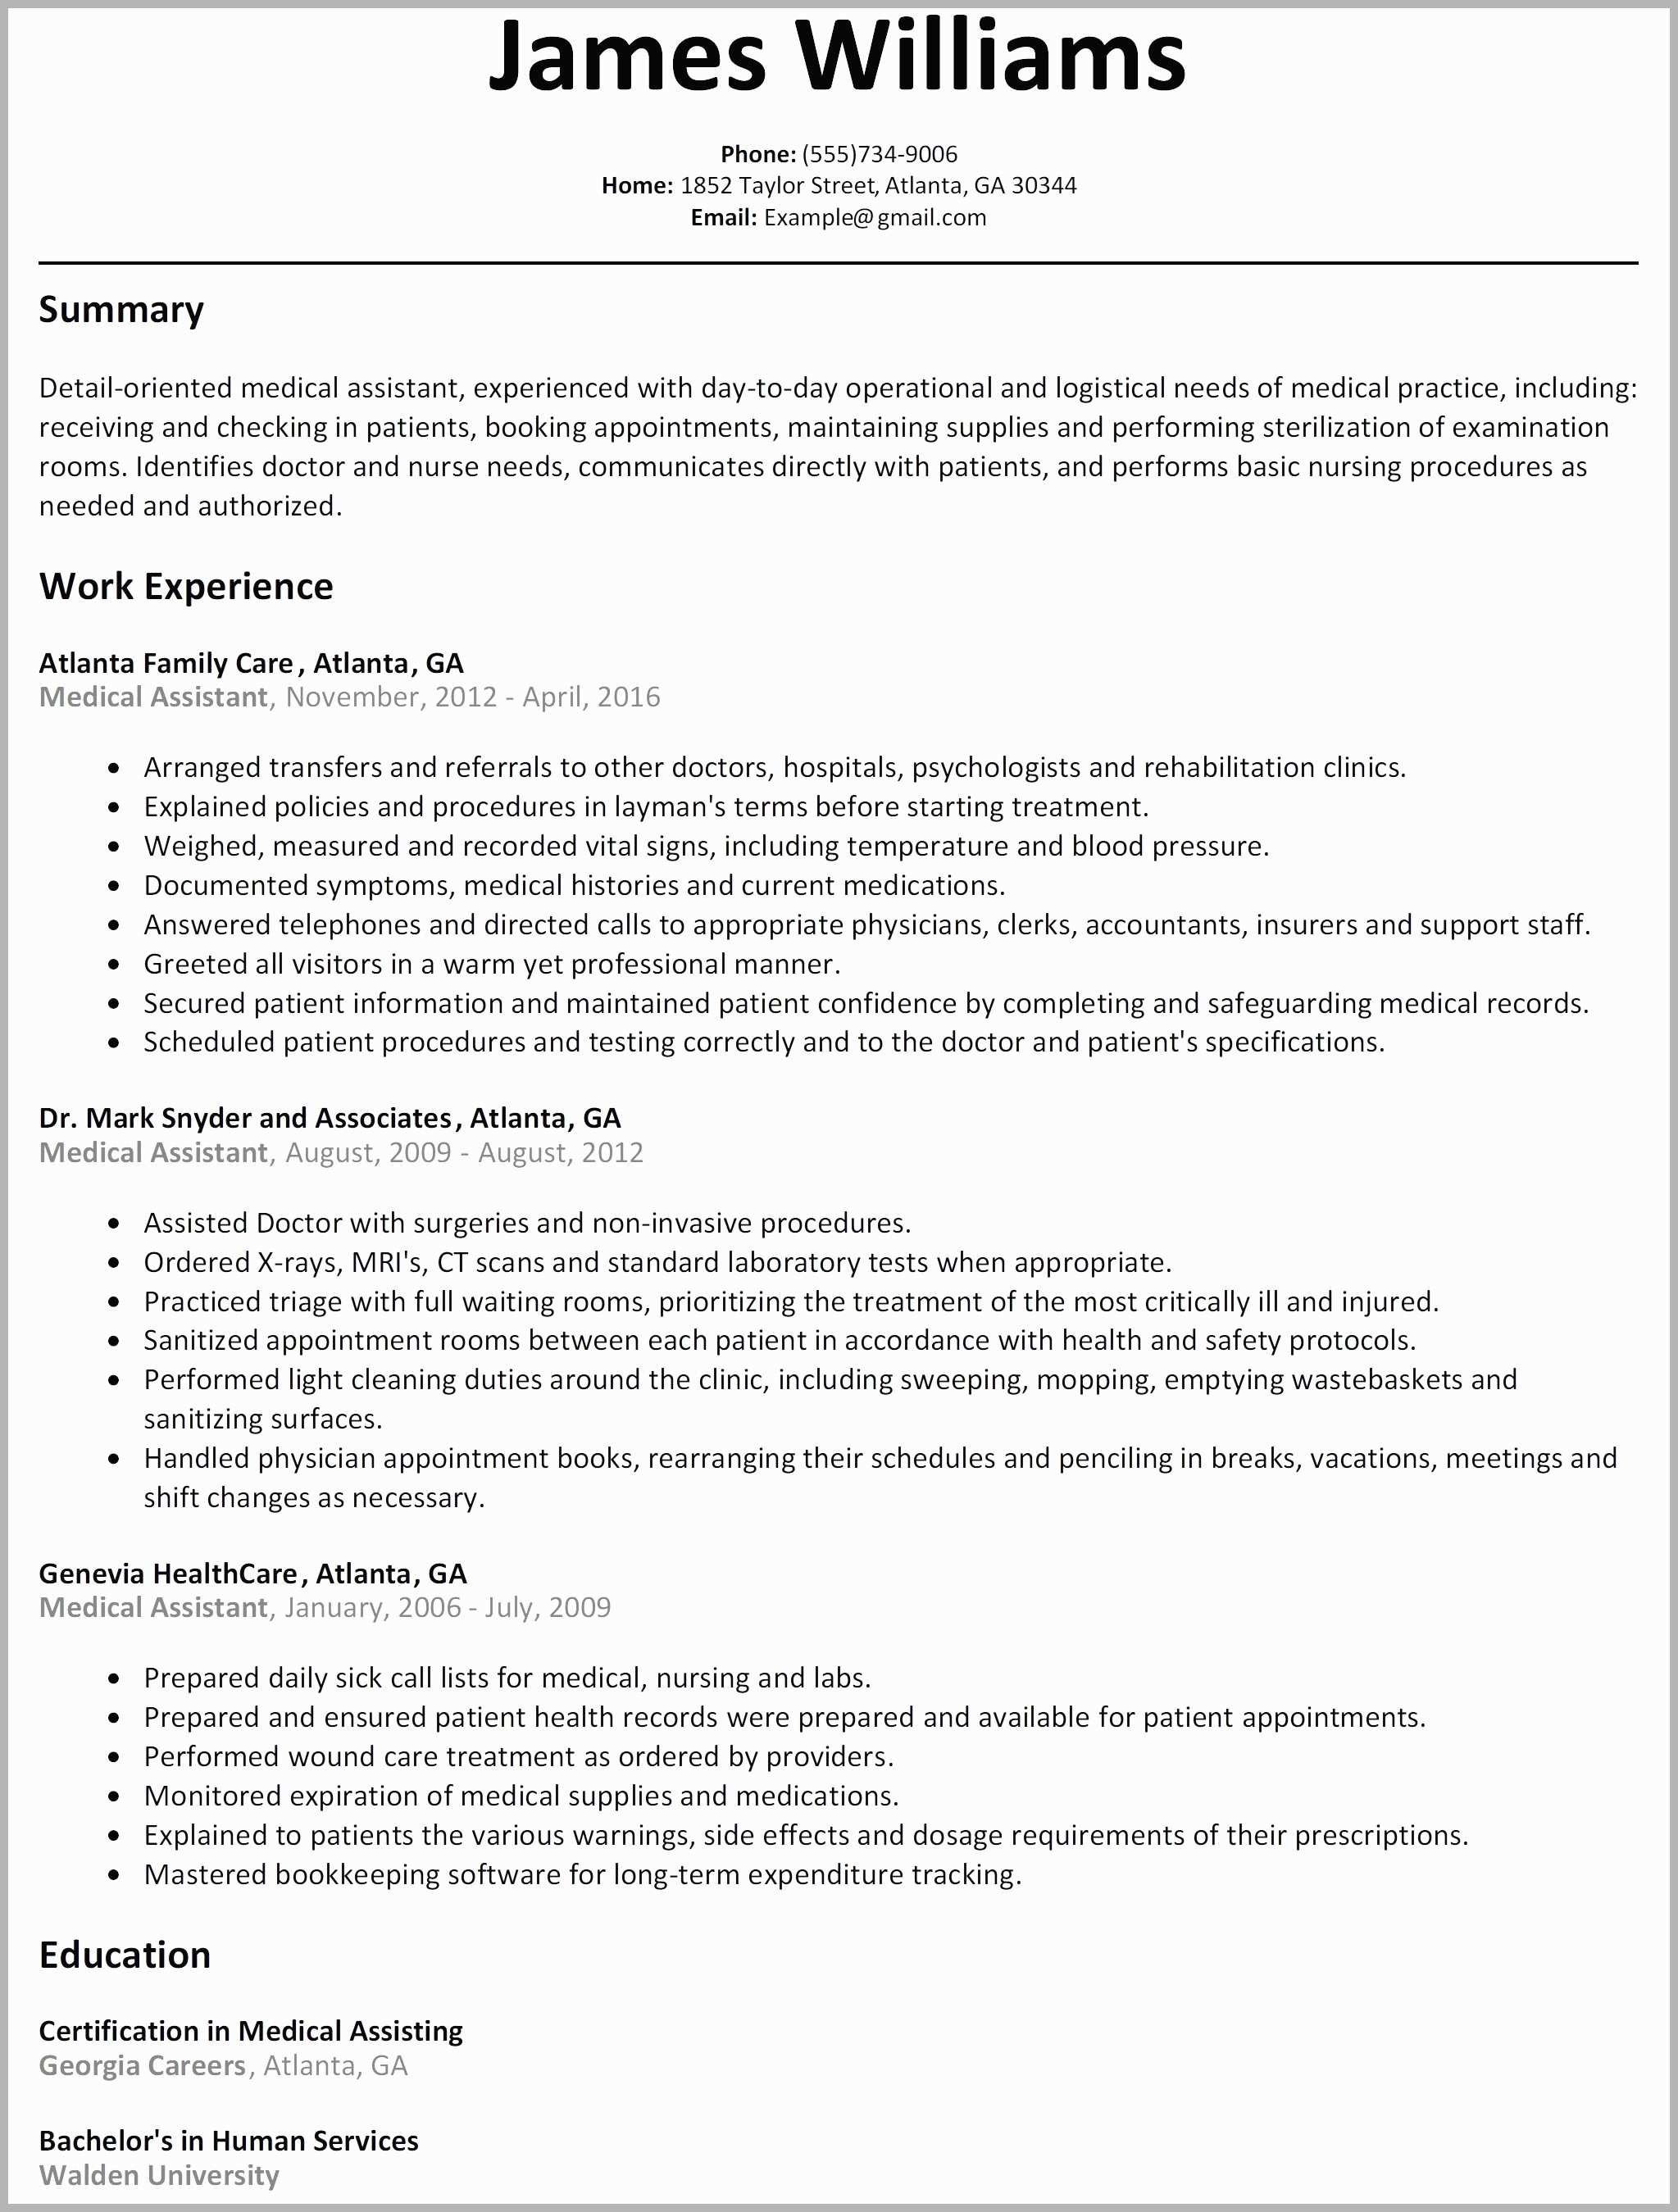 Industrial Electrician Resume Mt Home Arts